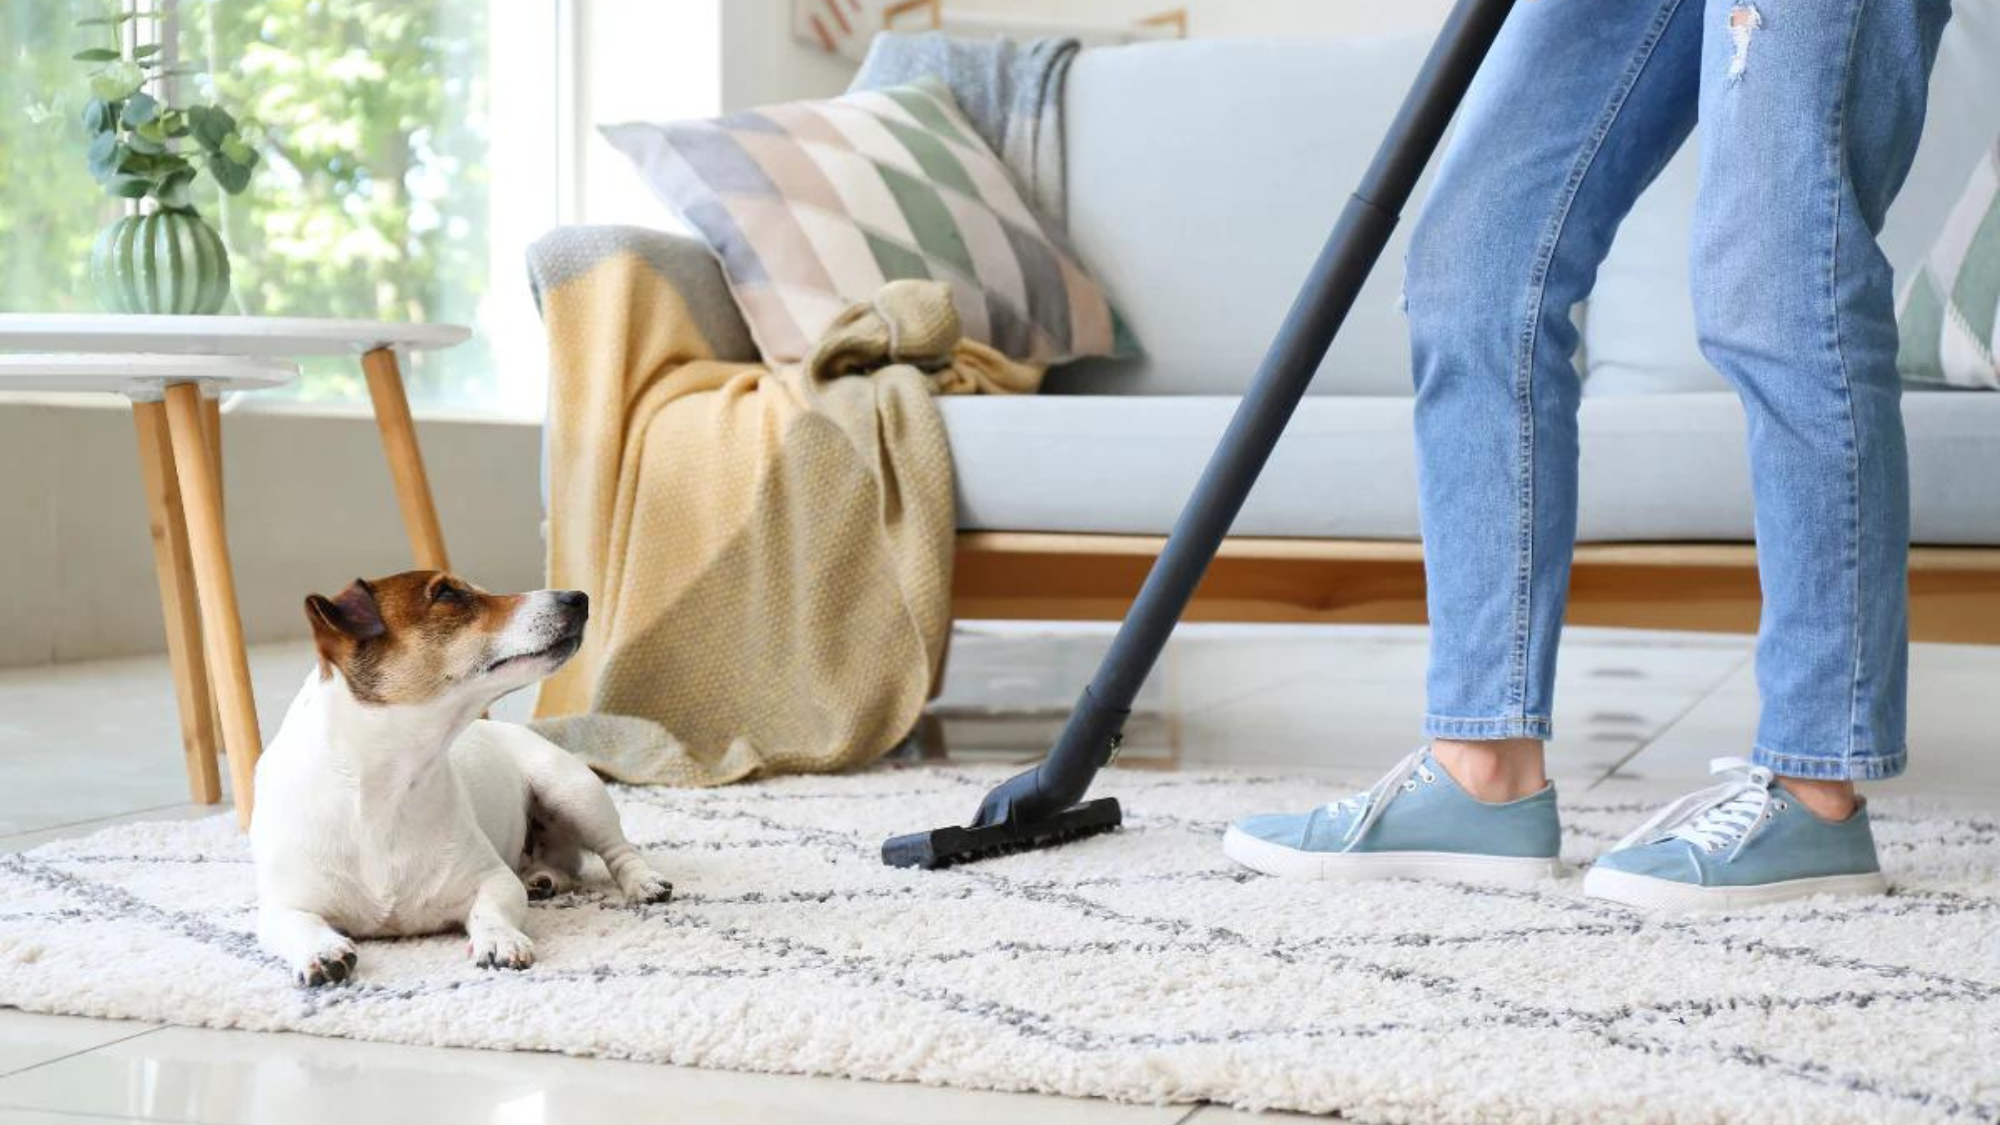 How to Clean Dog Diarrhea from Carpet